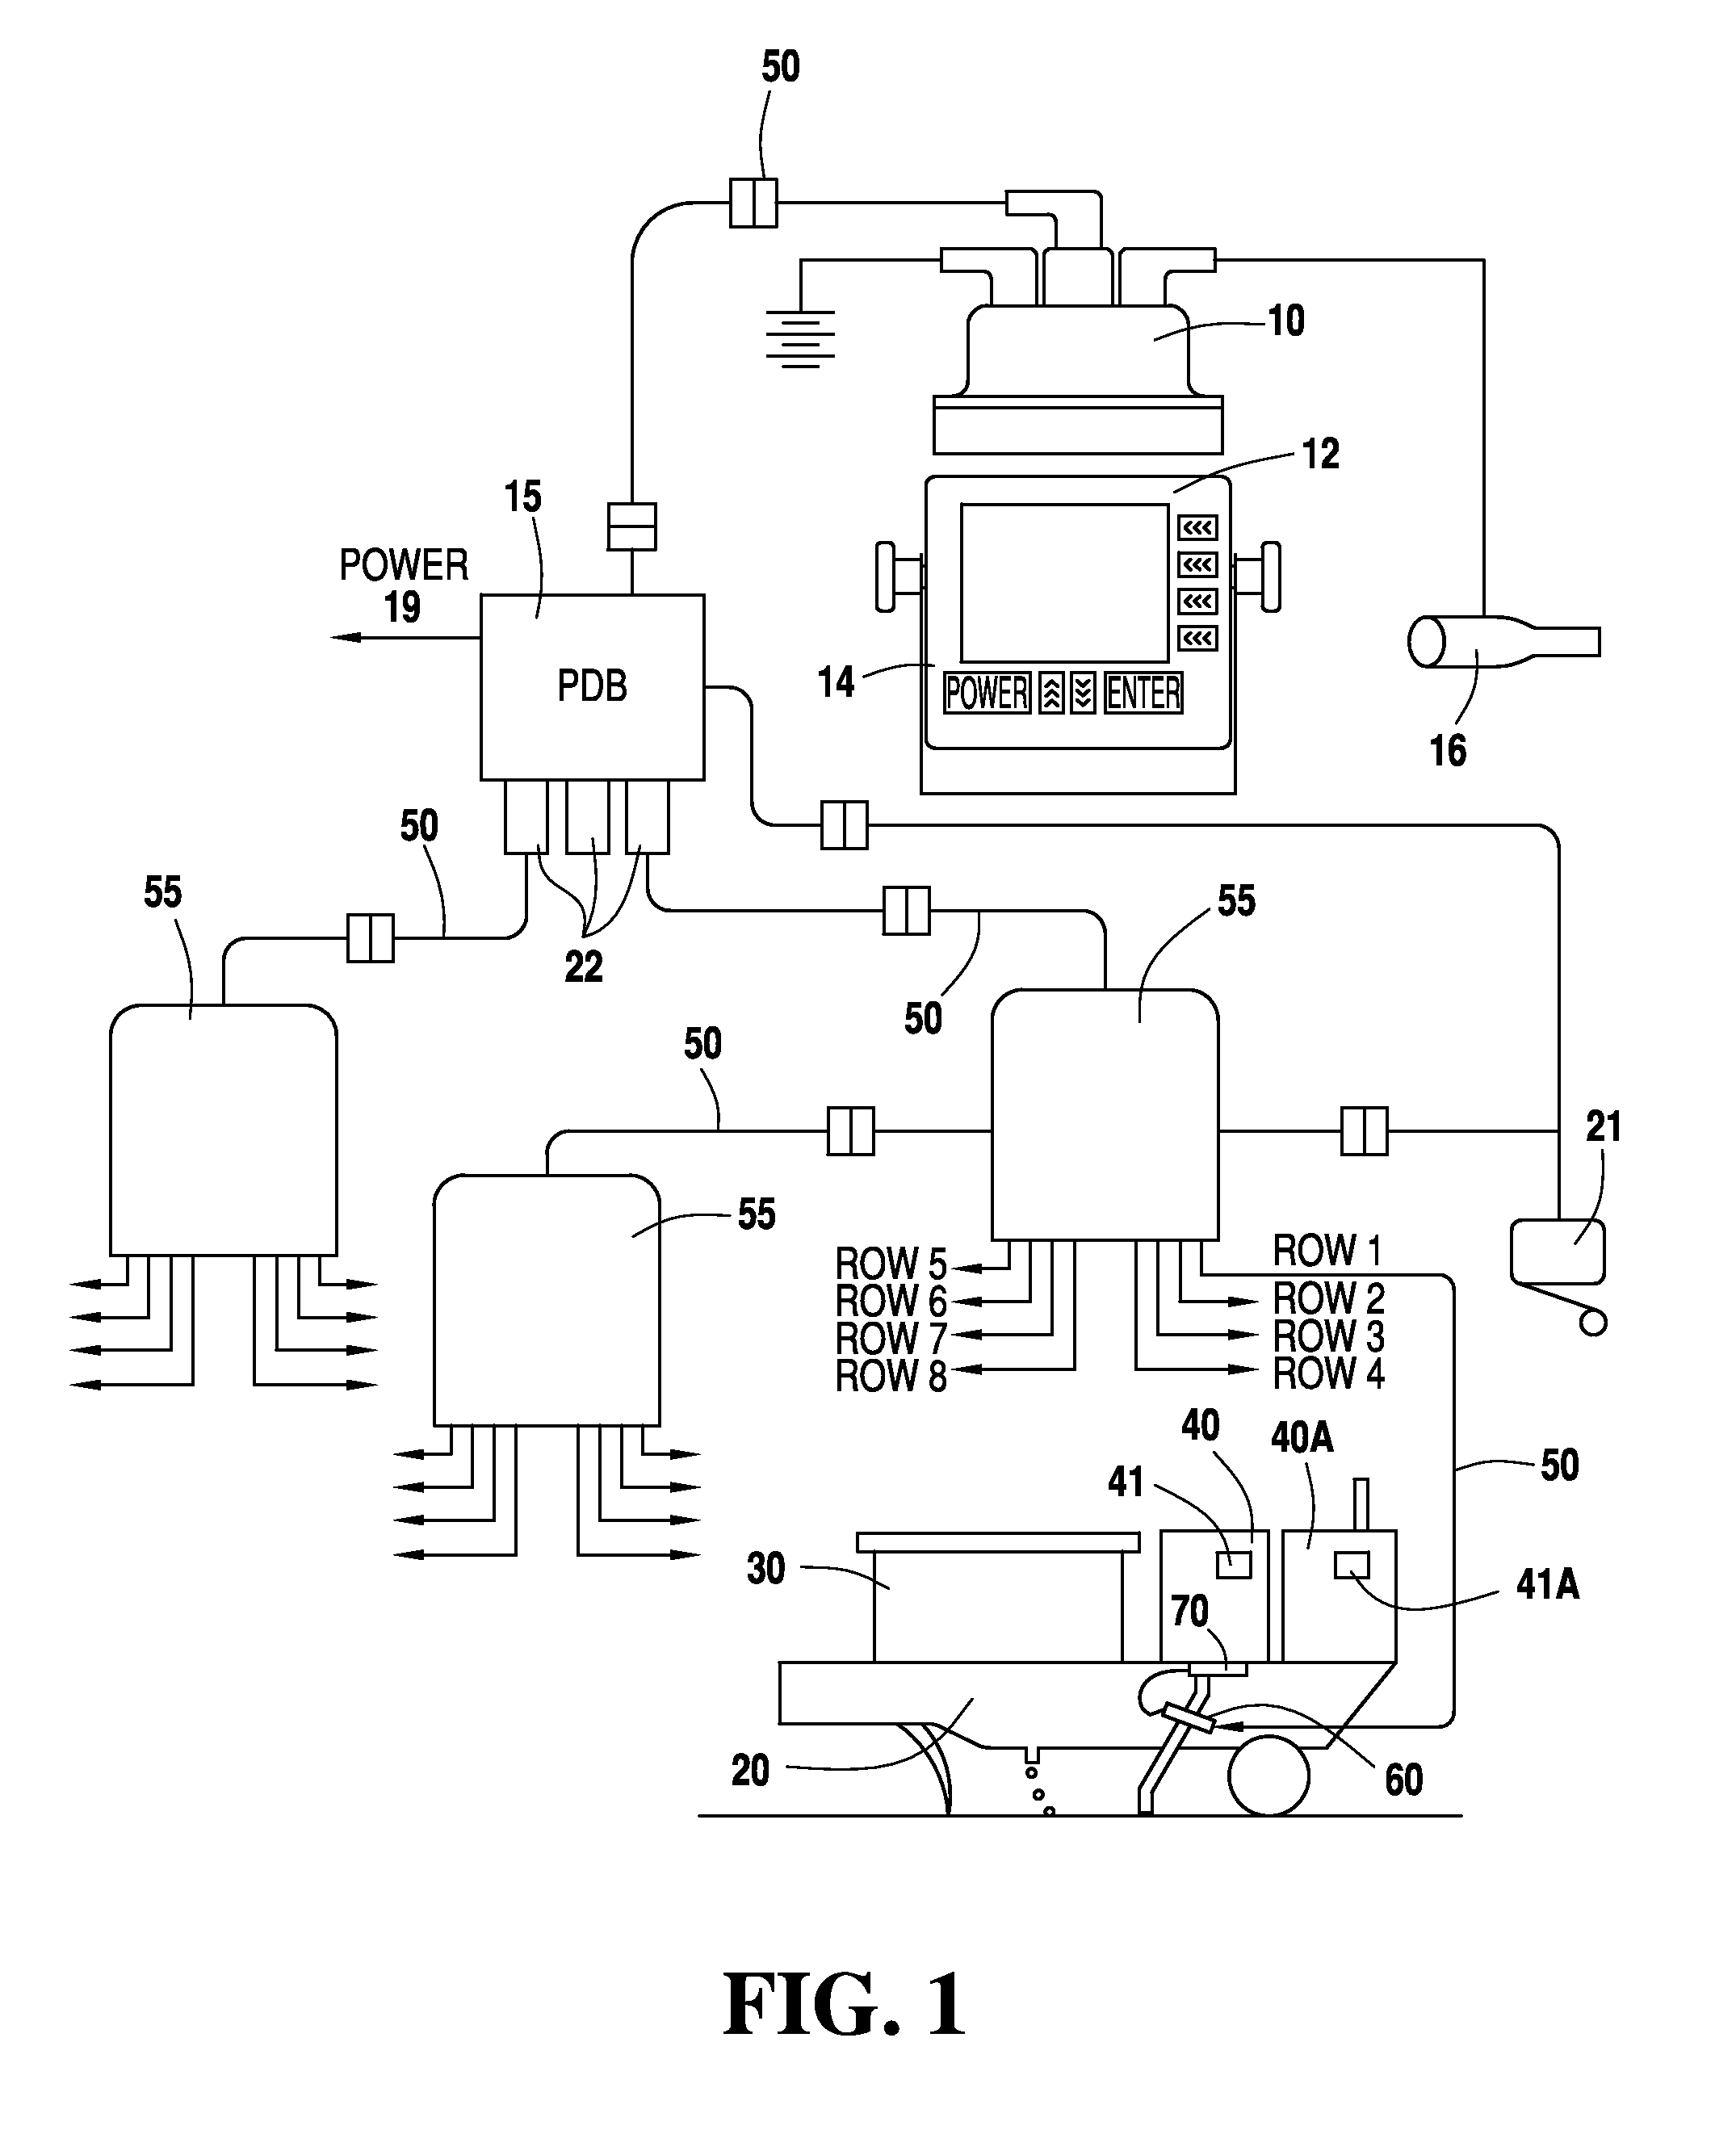 System and process for dispensing multiple and low rate agricultural products